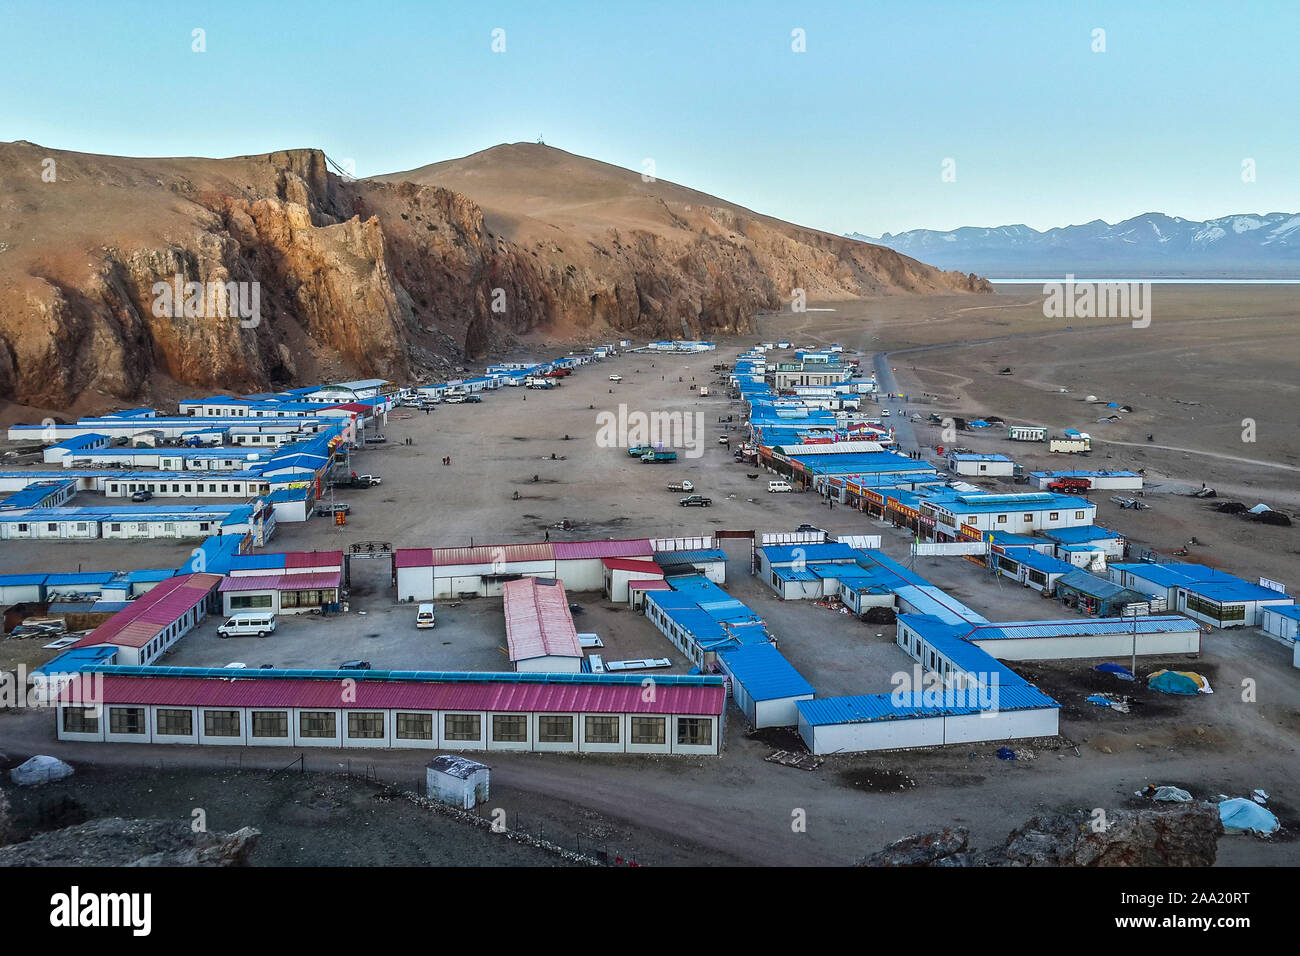 Container-like accommodation for tourists and pilgrims at Namtso Lake, a holy salt lake in the Tibet.  Namtso is Tibetan for 'Heavenly :Lake'. Stock Photo